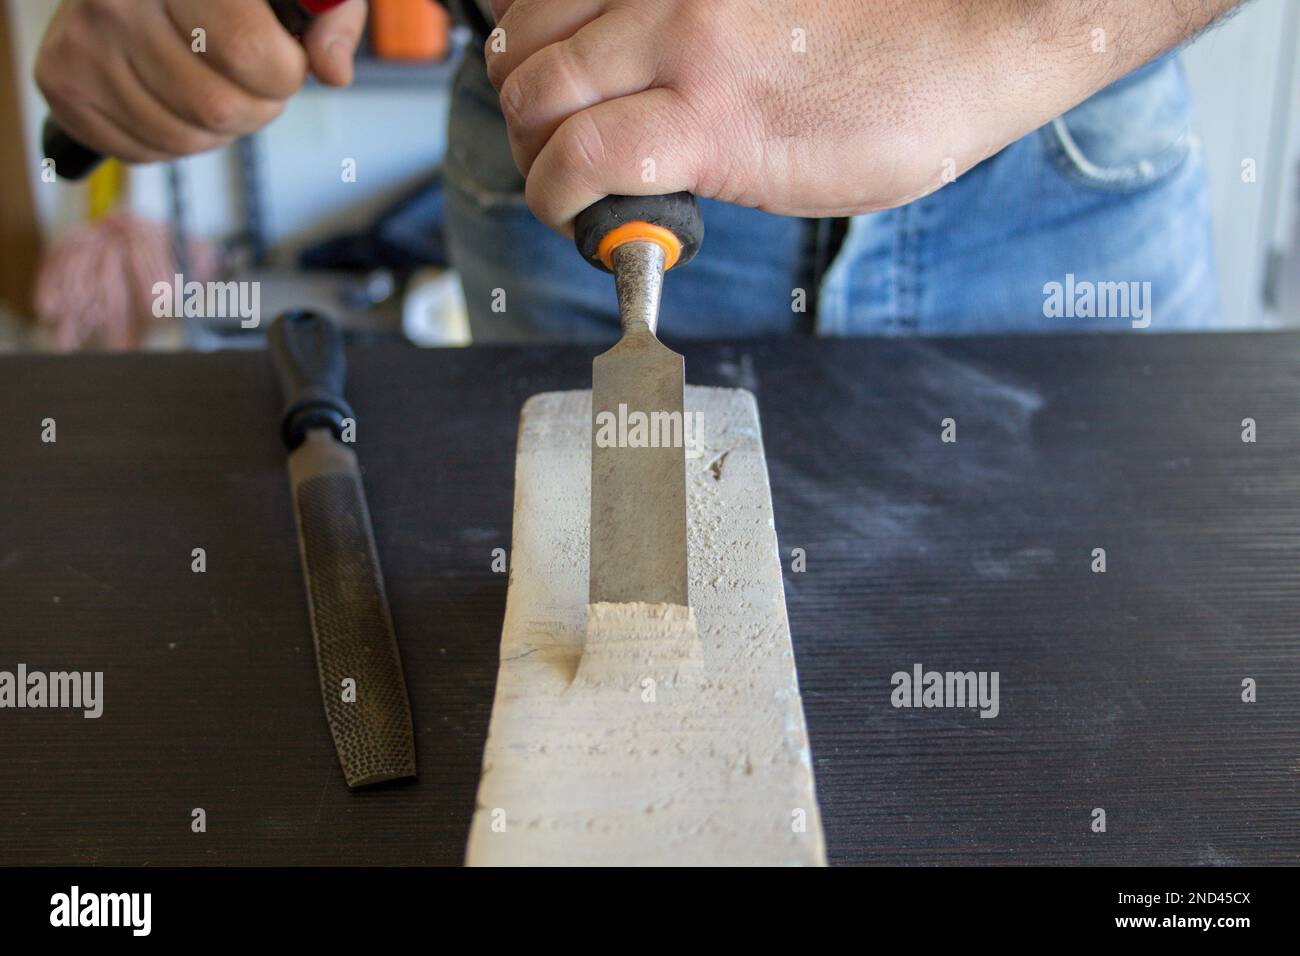 Image of a handyman craftsman's hands holding a carpenter's hammer and chisel while doing some work and carving on wood. DIY work in the laboratory. Stock Photo